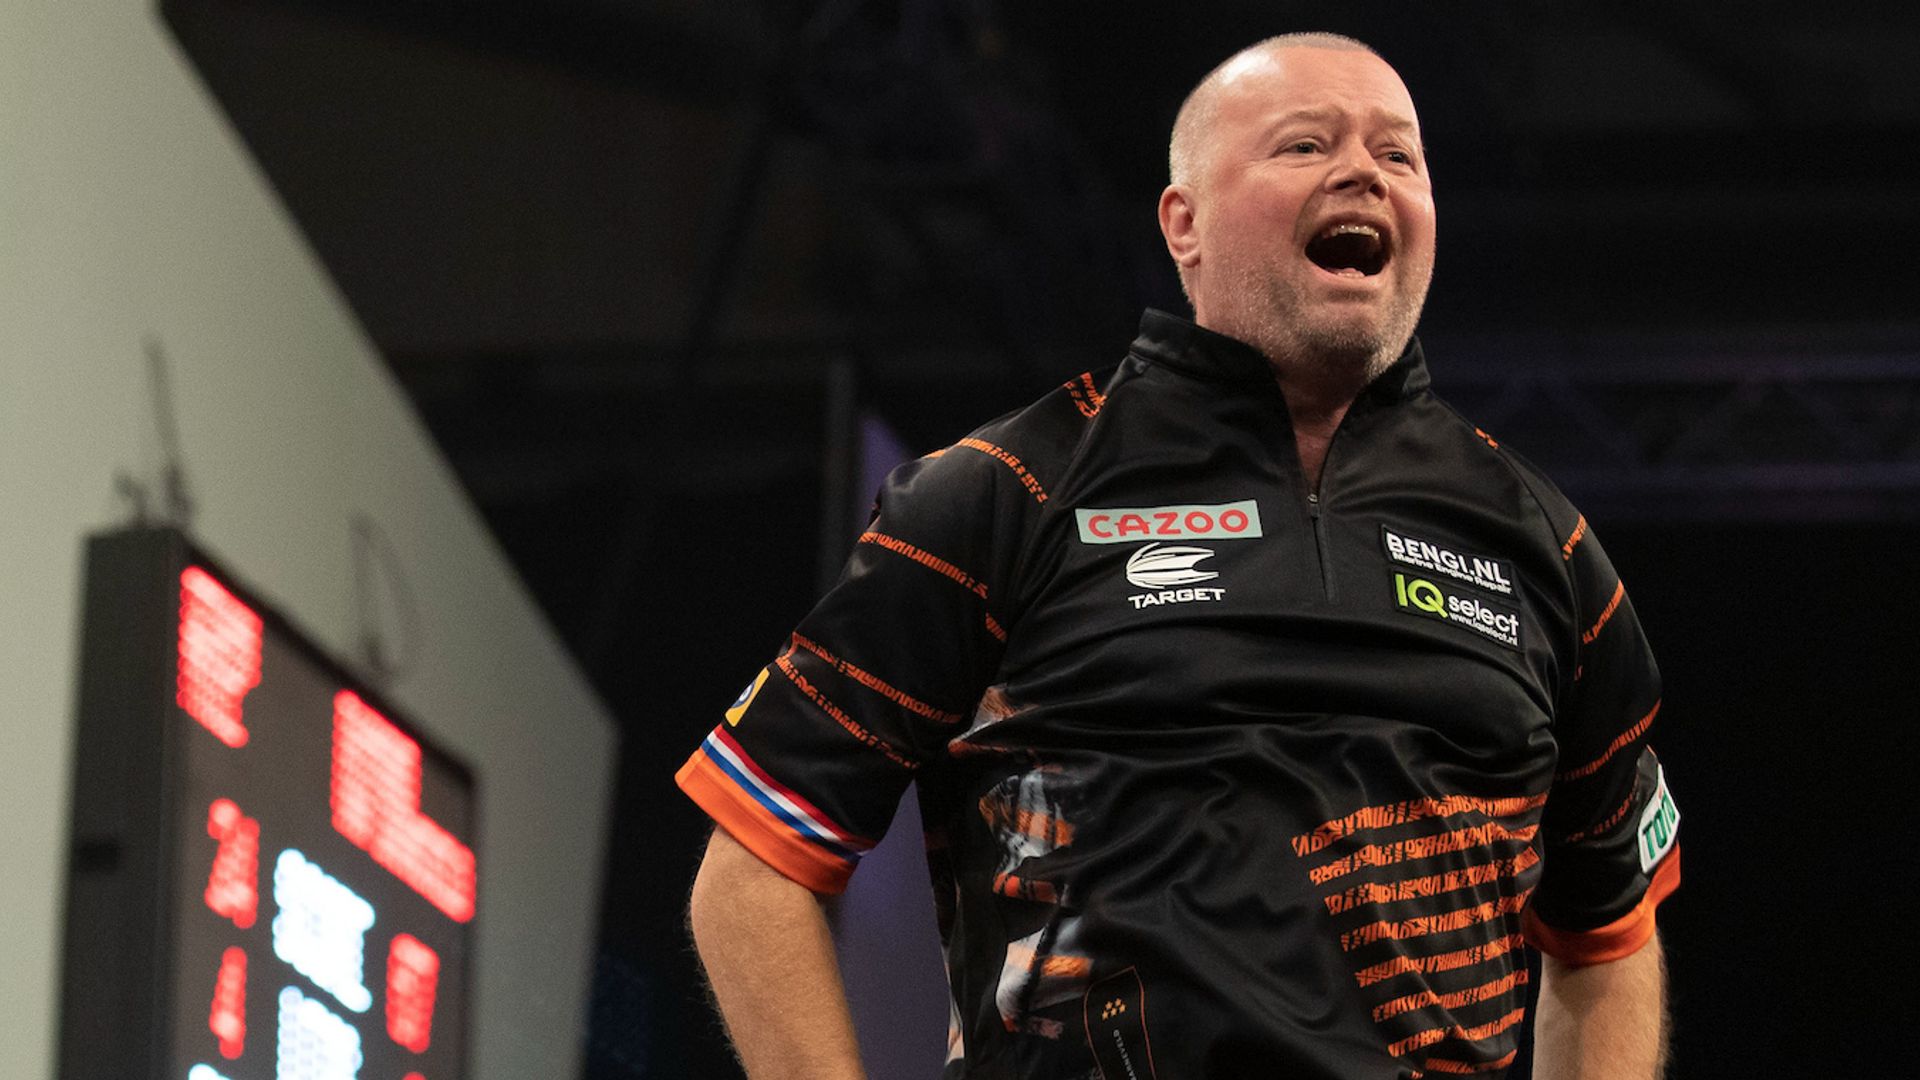 Classic Barney qualifies after edging Worth in Grand Slam of Darts classicSkySports | Information